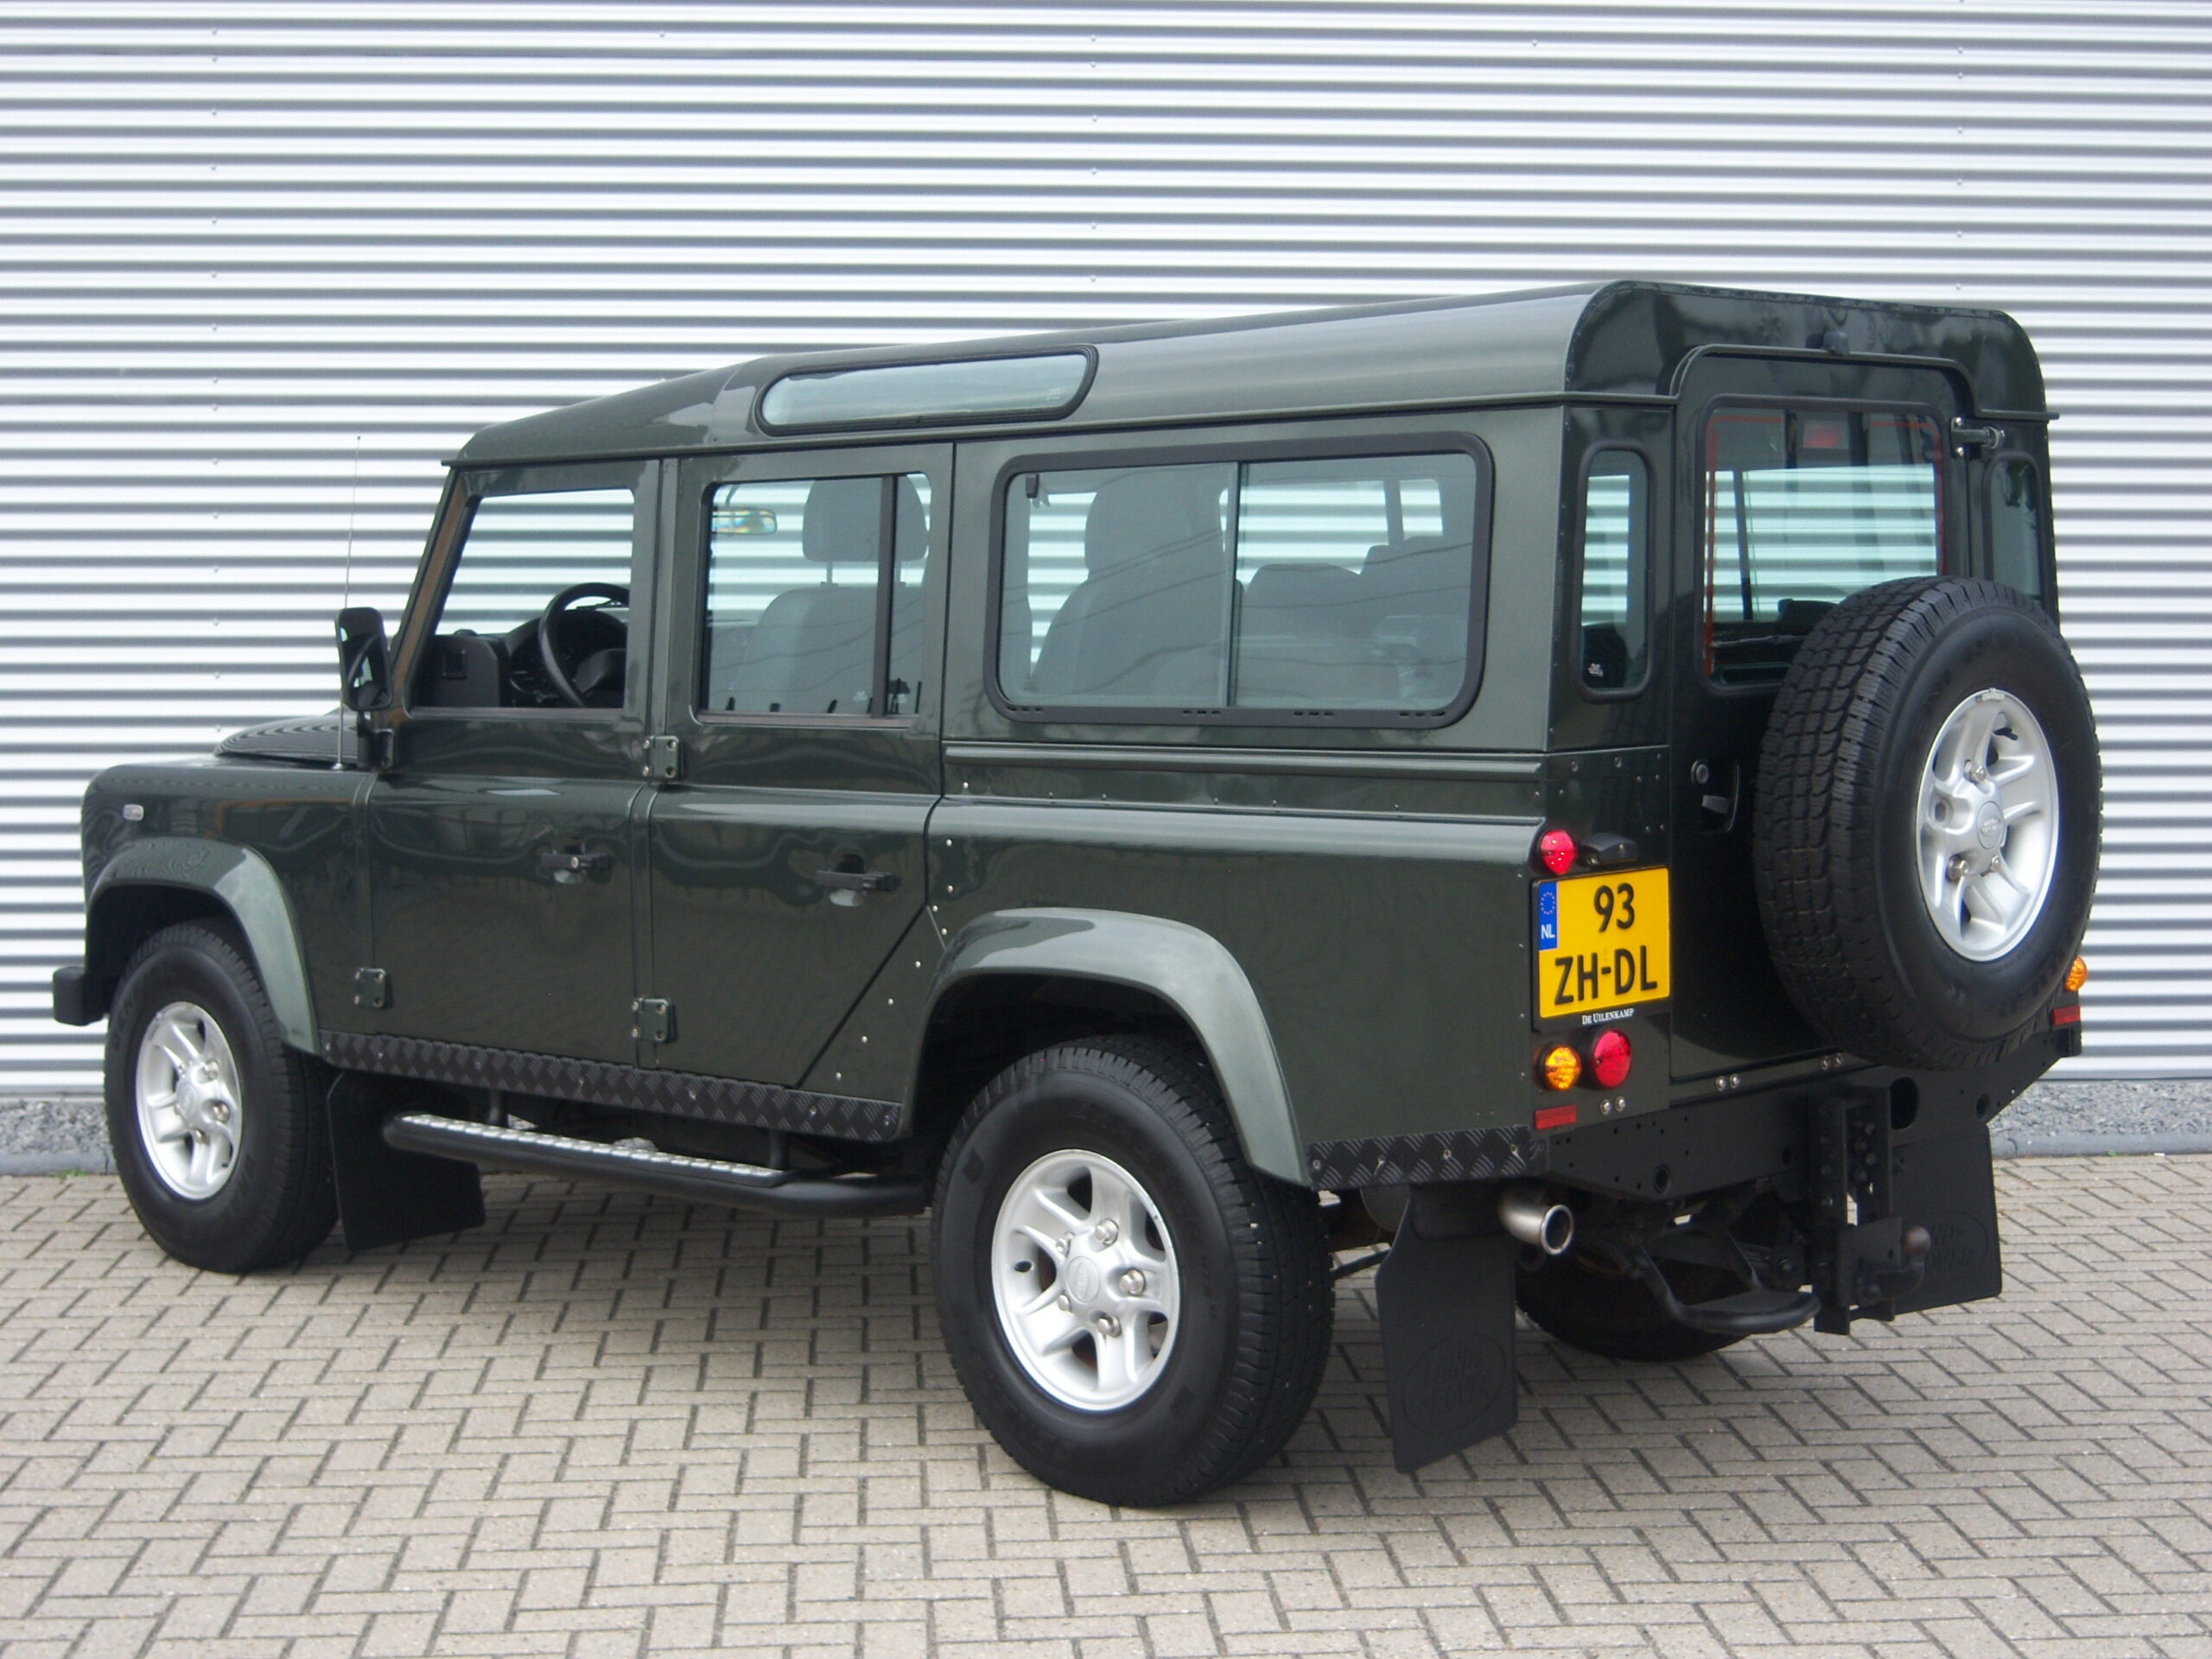 Land Rover Defender 110 2.4 TD Station Wagon X-Tech 7- seater